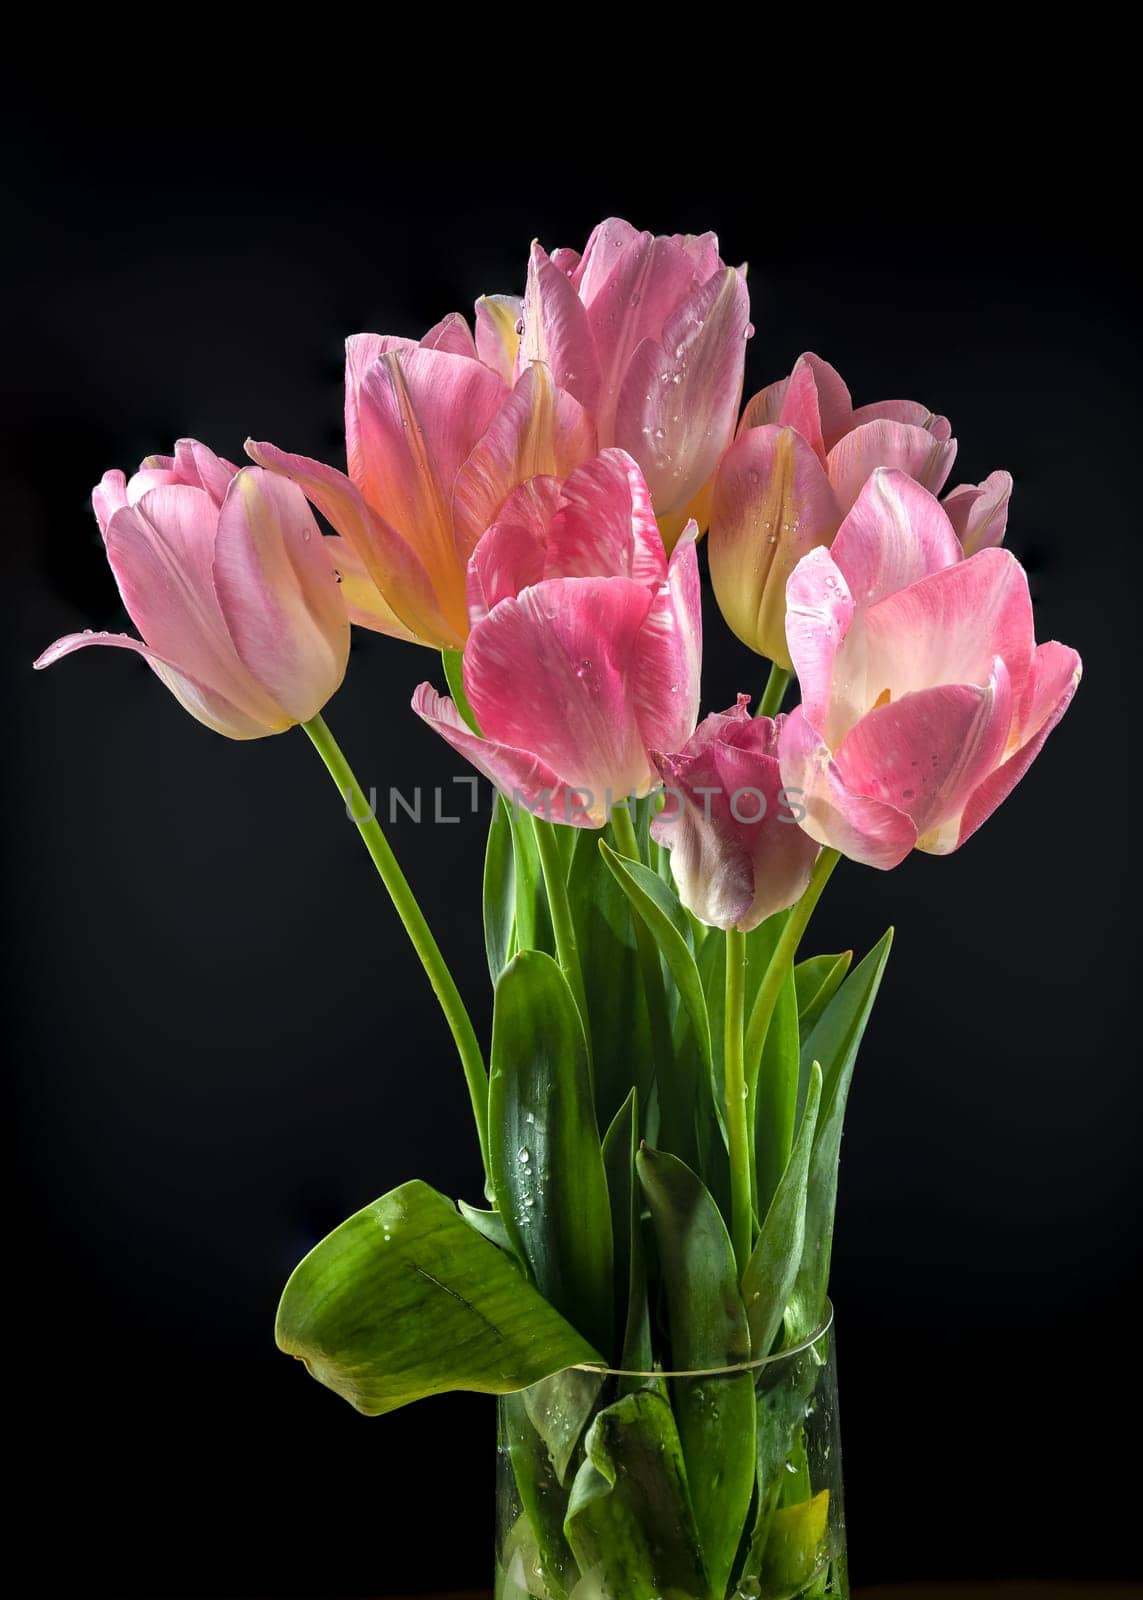 Beautiful blooming pink tulips flowers isolated on a black background. Flower head close-up.